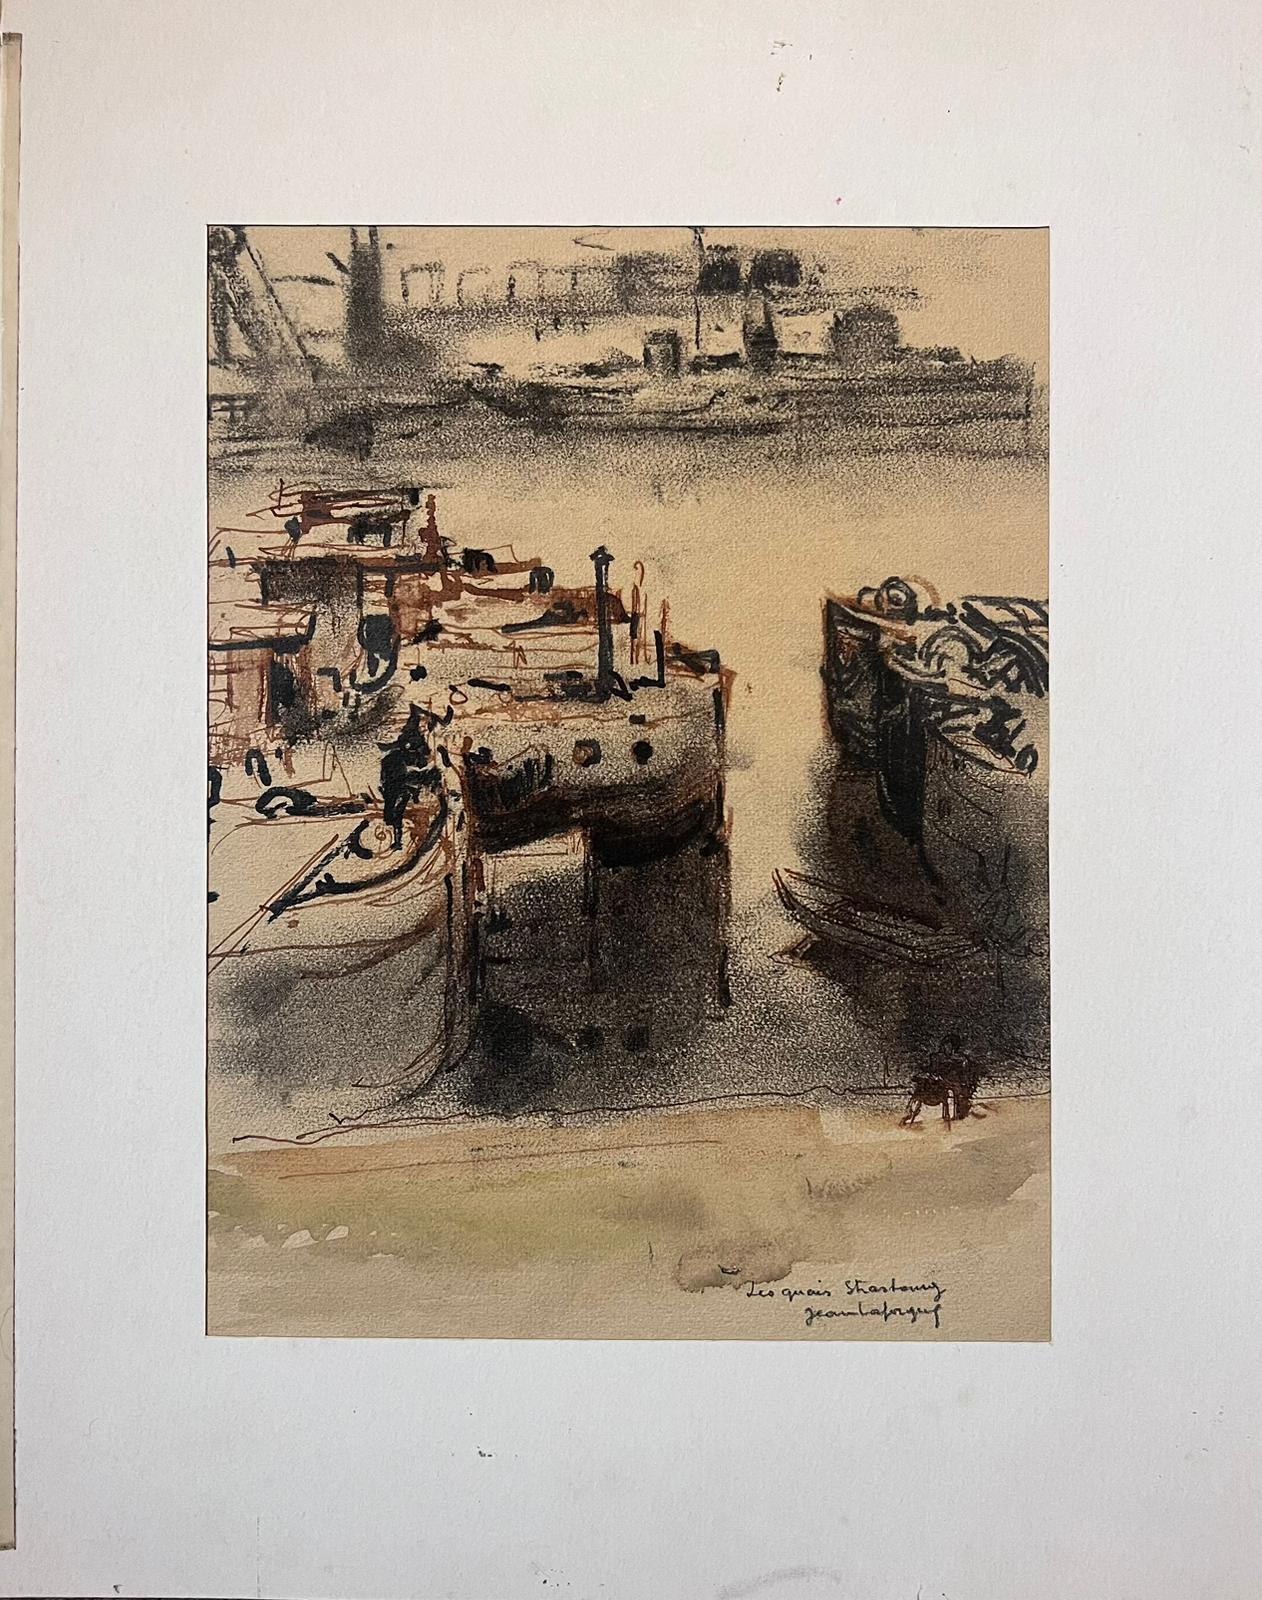 Jean La Forgue (French 1901-1975) signed watercolour, ink and chalk on paper, mounted in a card frame
inscribed verso
card frame: 16 x 12.5 inches
painting: 12 x 9.5 inches
provenance: the artists estate, France
condition: very good and sound